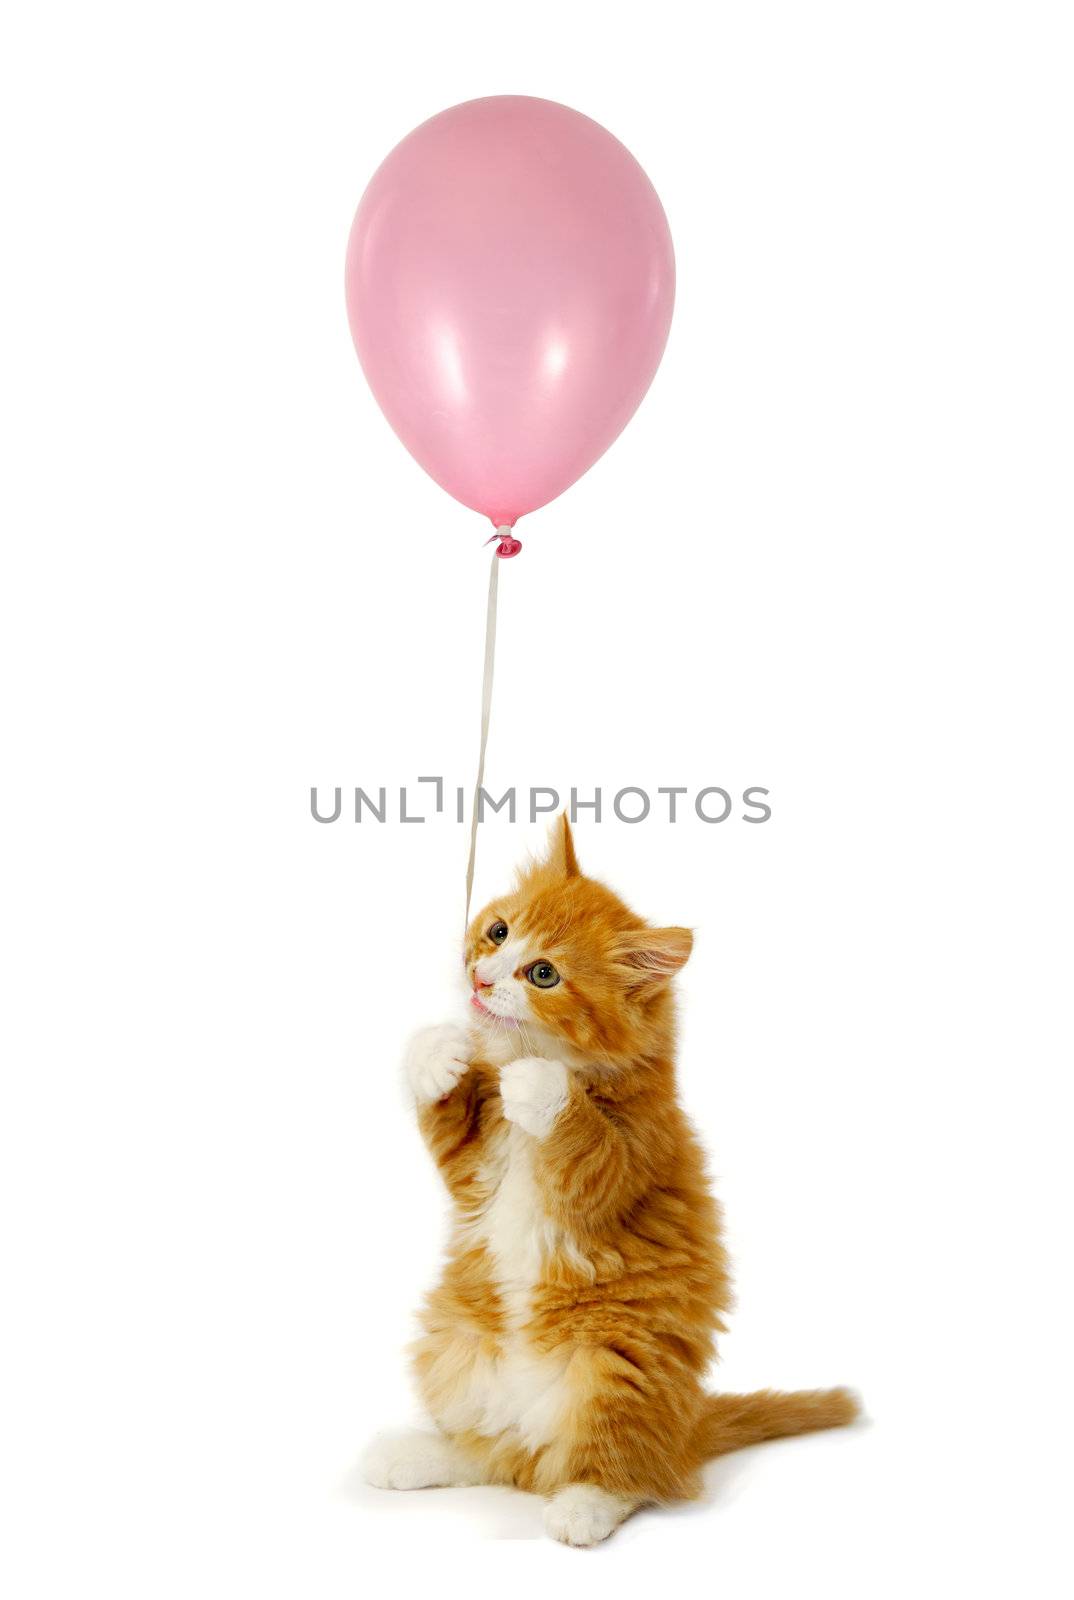 Sweet cat kitten isloated on clean white background. The kitten is holding a pink balloon.